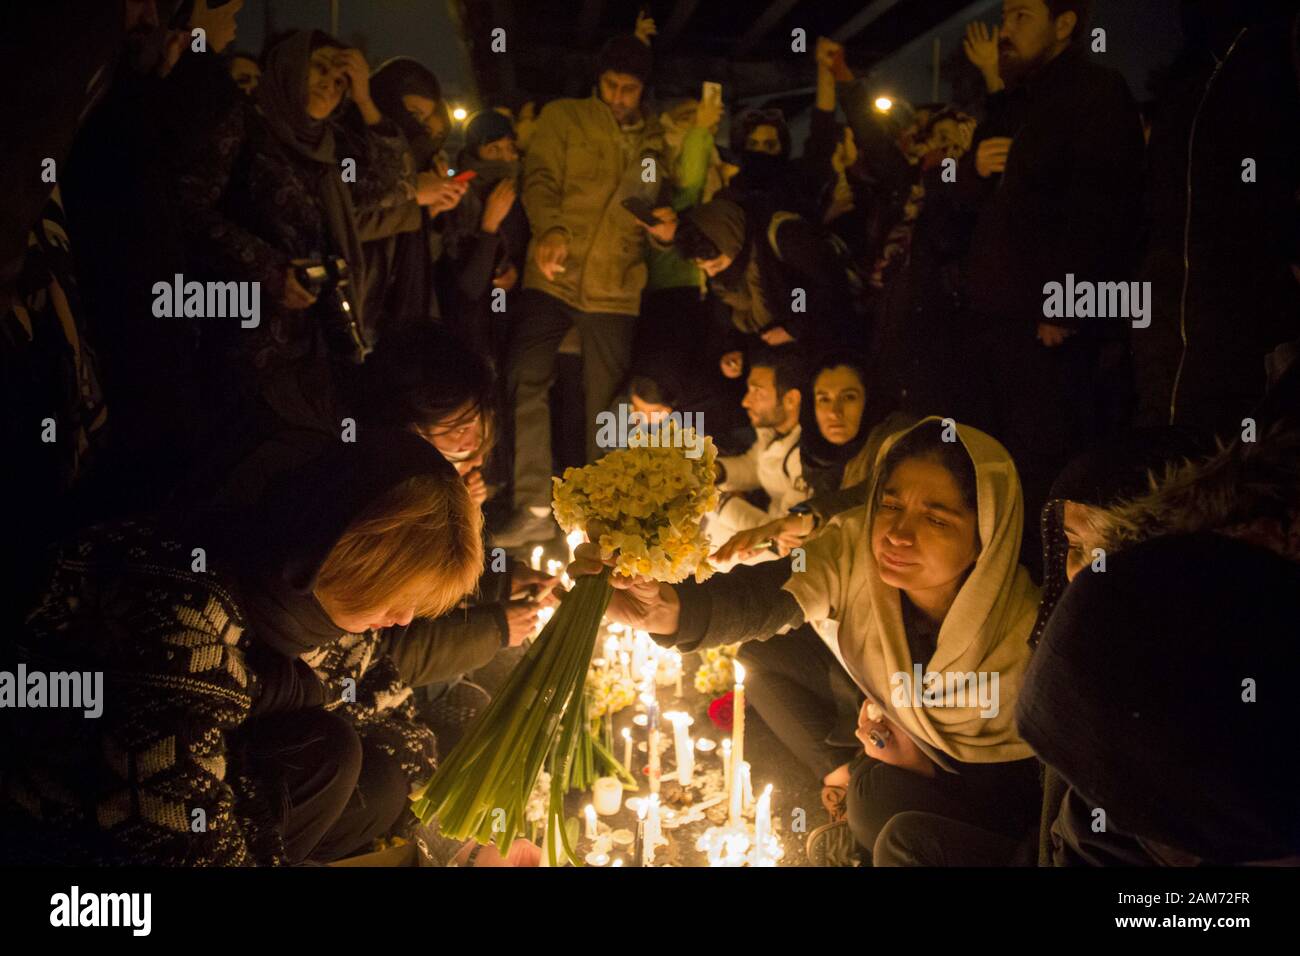 Tehran, Iran. 11th Jan, 2020. Iranians light candles for victims of Ukraine International Airlines Boeing 737-800 during as they protest in front of the Amir Kabir University in downtown Tehran, Iran. Media reported that hundreds of Iranians protest in Tehran in solidarity with victims of the Ukraine plane as the Iranian military released a statement claiming that Ukraine International Airlines flight PS752 was shot down due to human error. Credit: Rouzbeh Fouladi/ZUMA Wire/Alamy Live News Stock Photo